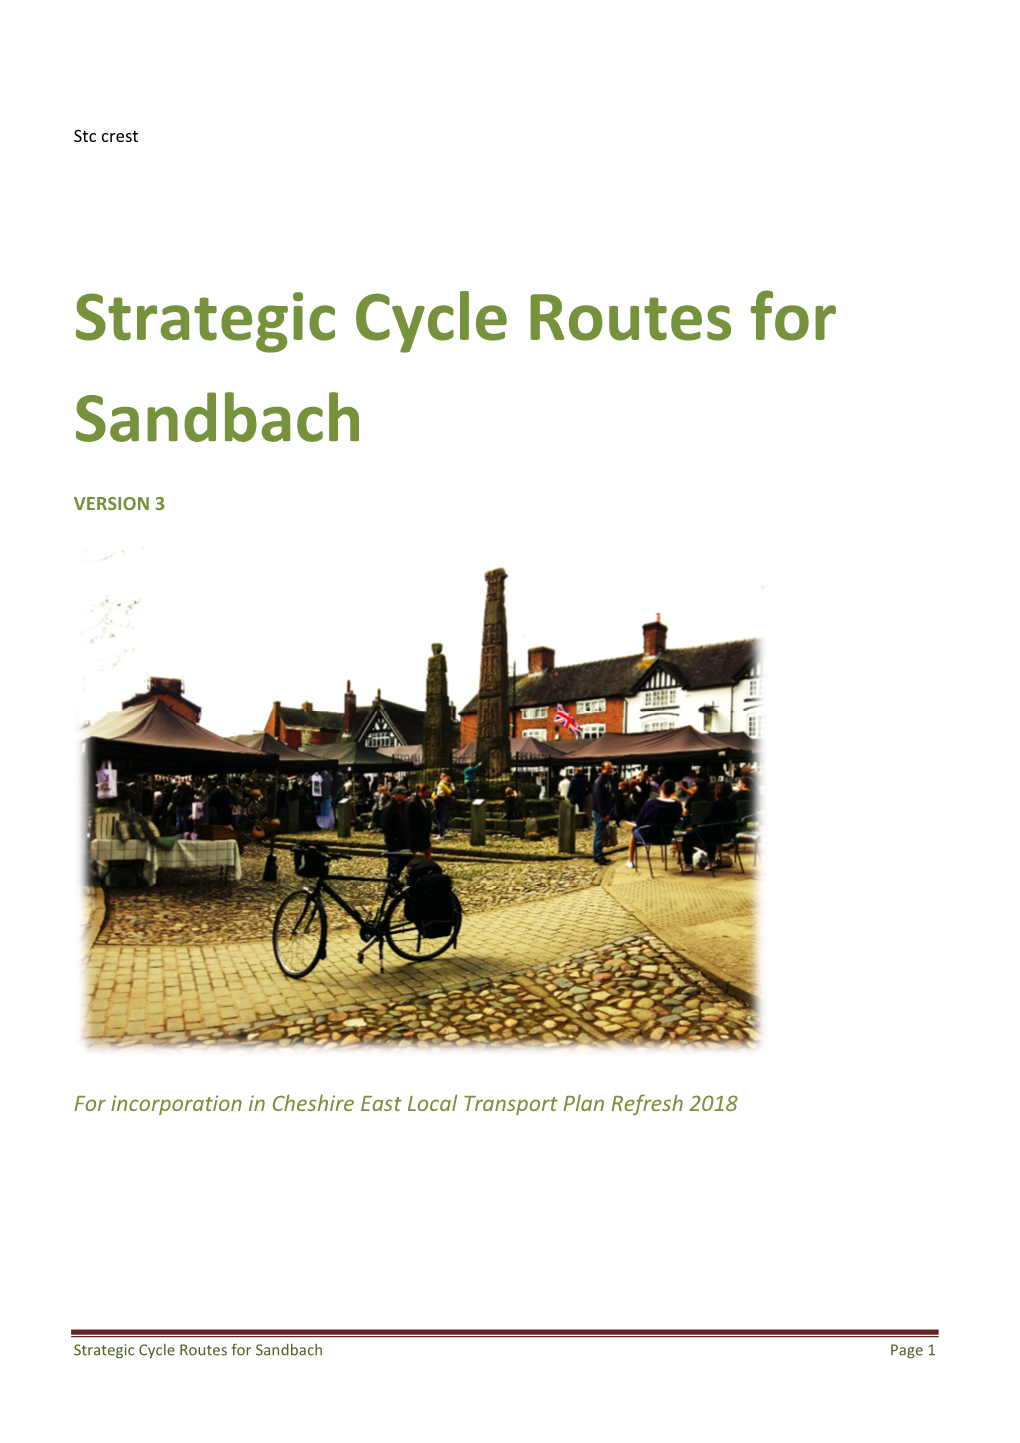 Strategic Cycle Routes for Sandbach